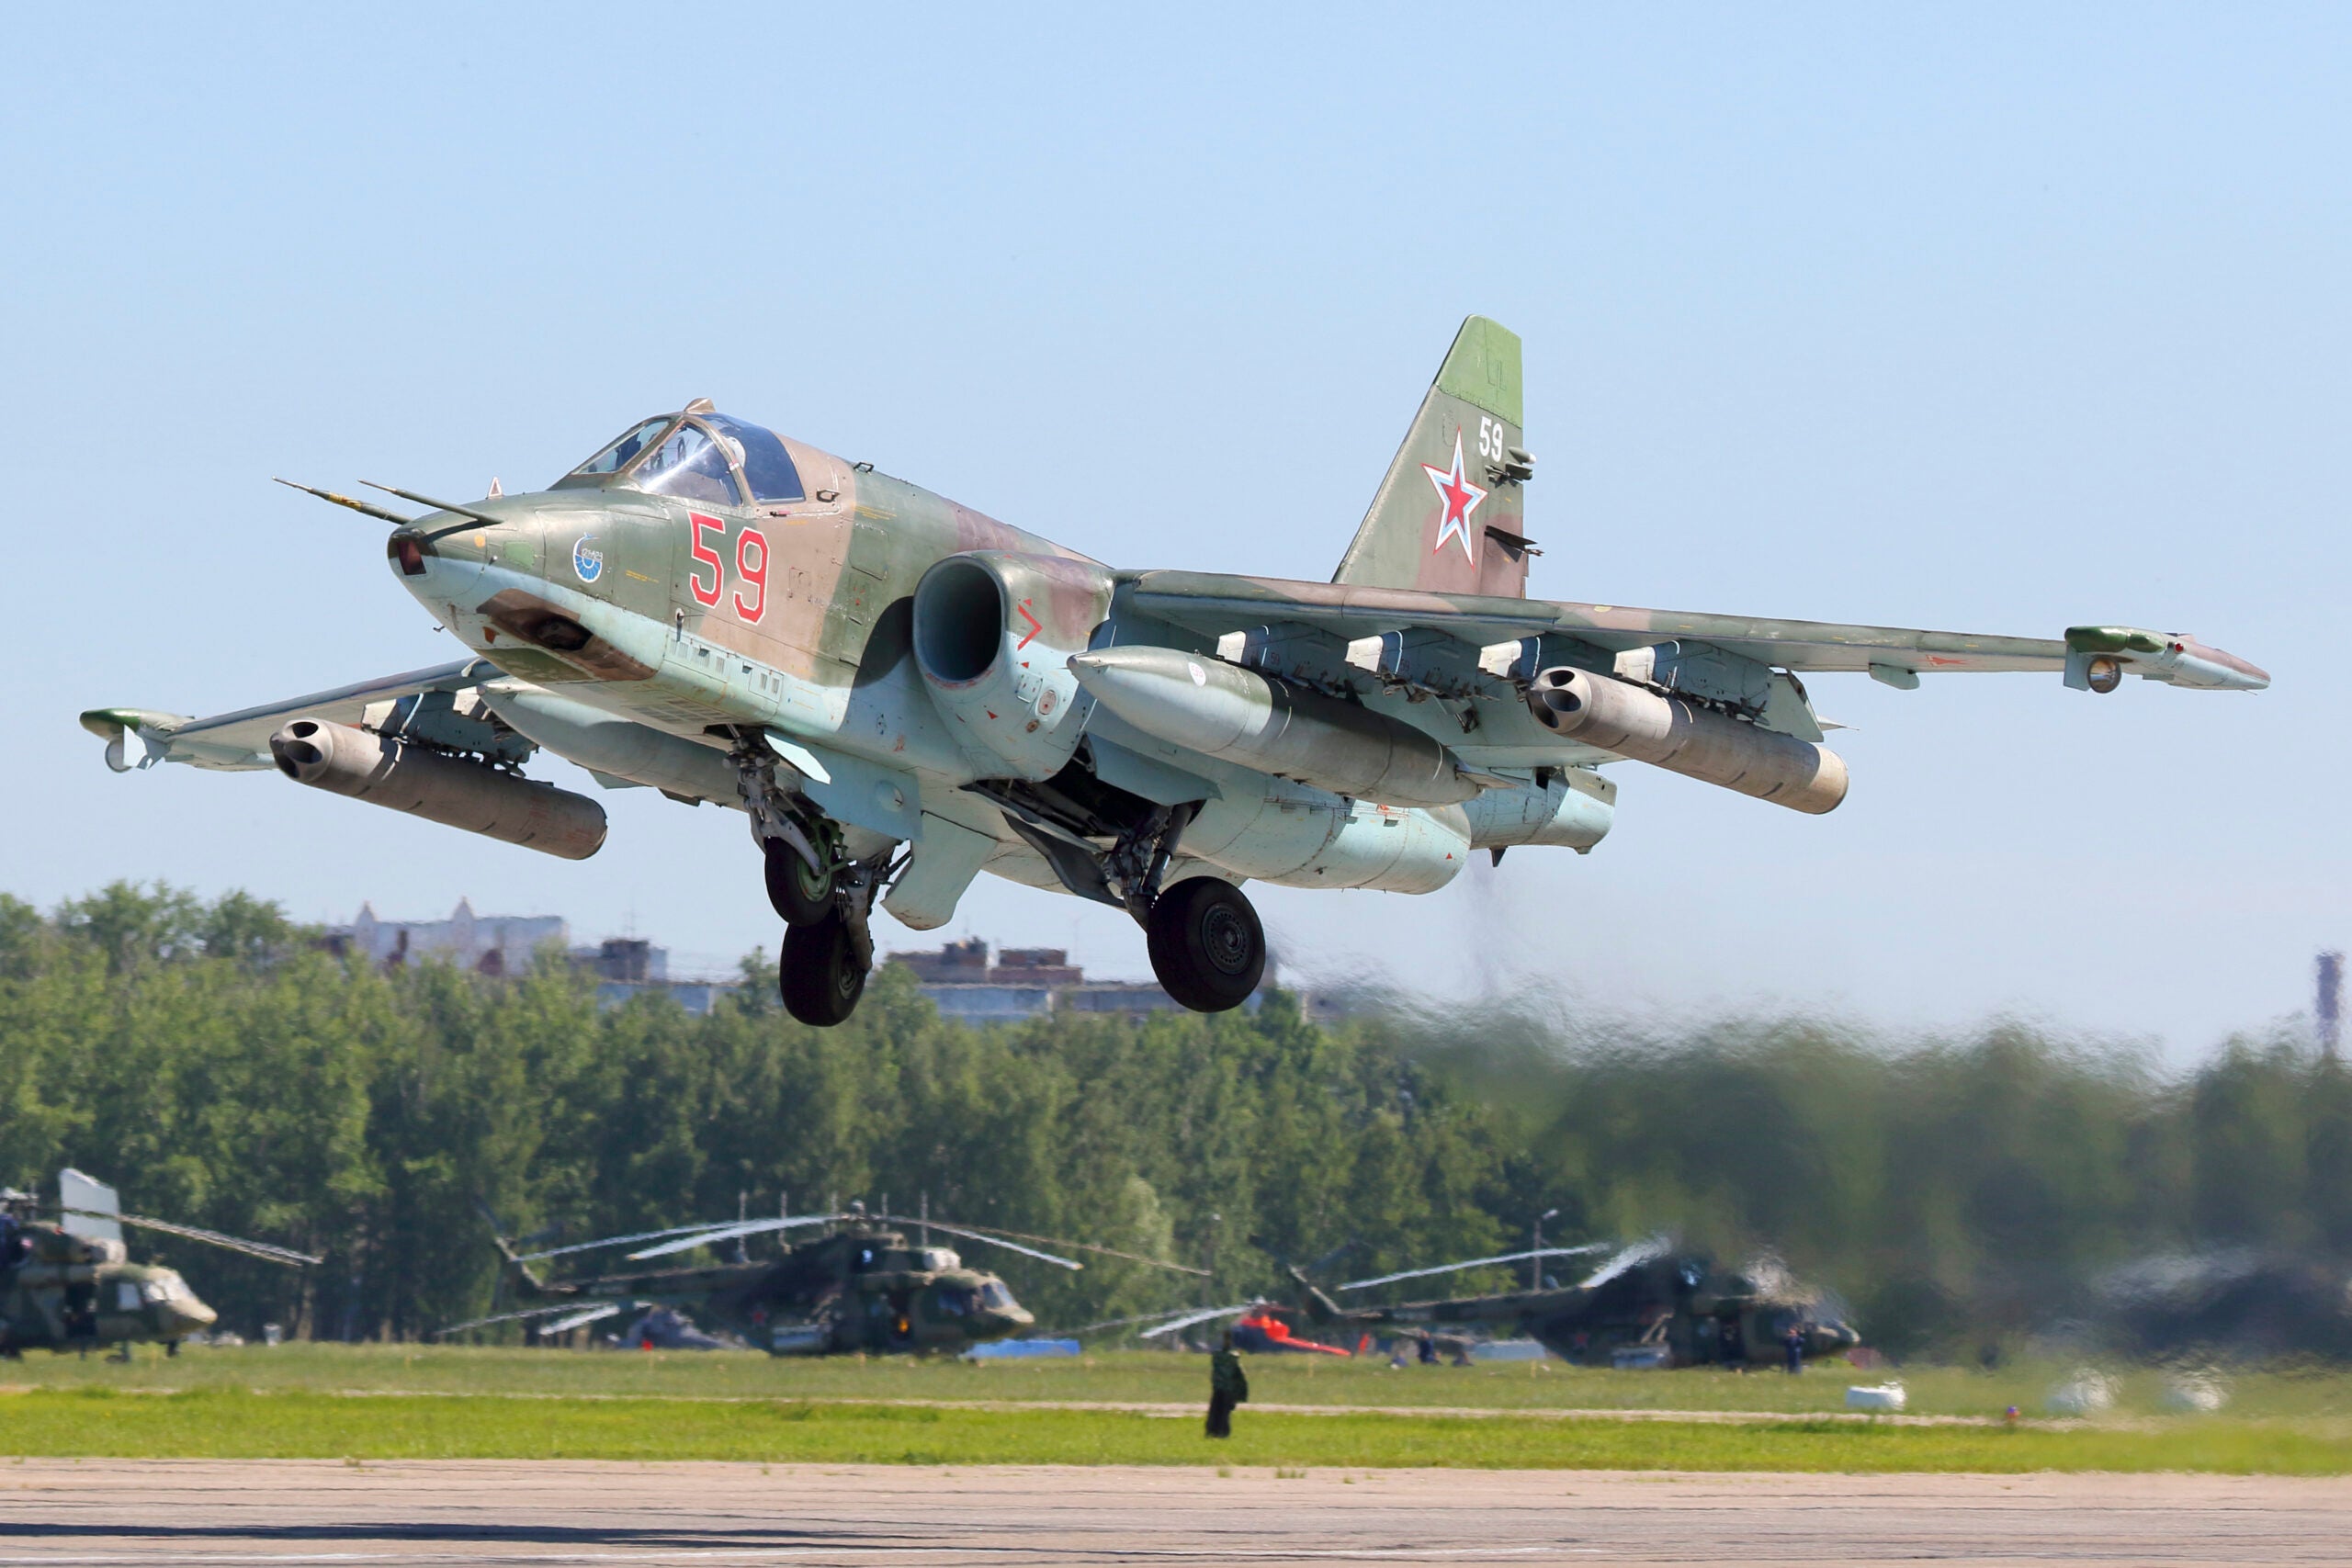 Su-25SM attack airplane of the Russian Air Force taking off during Exercise Aviadarts 2018.